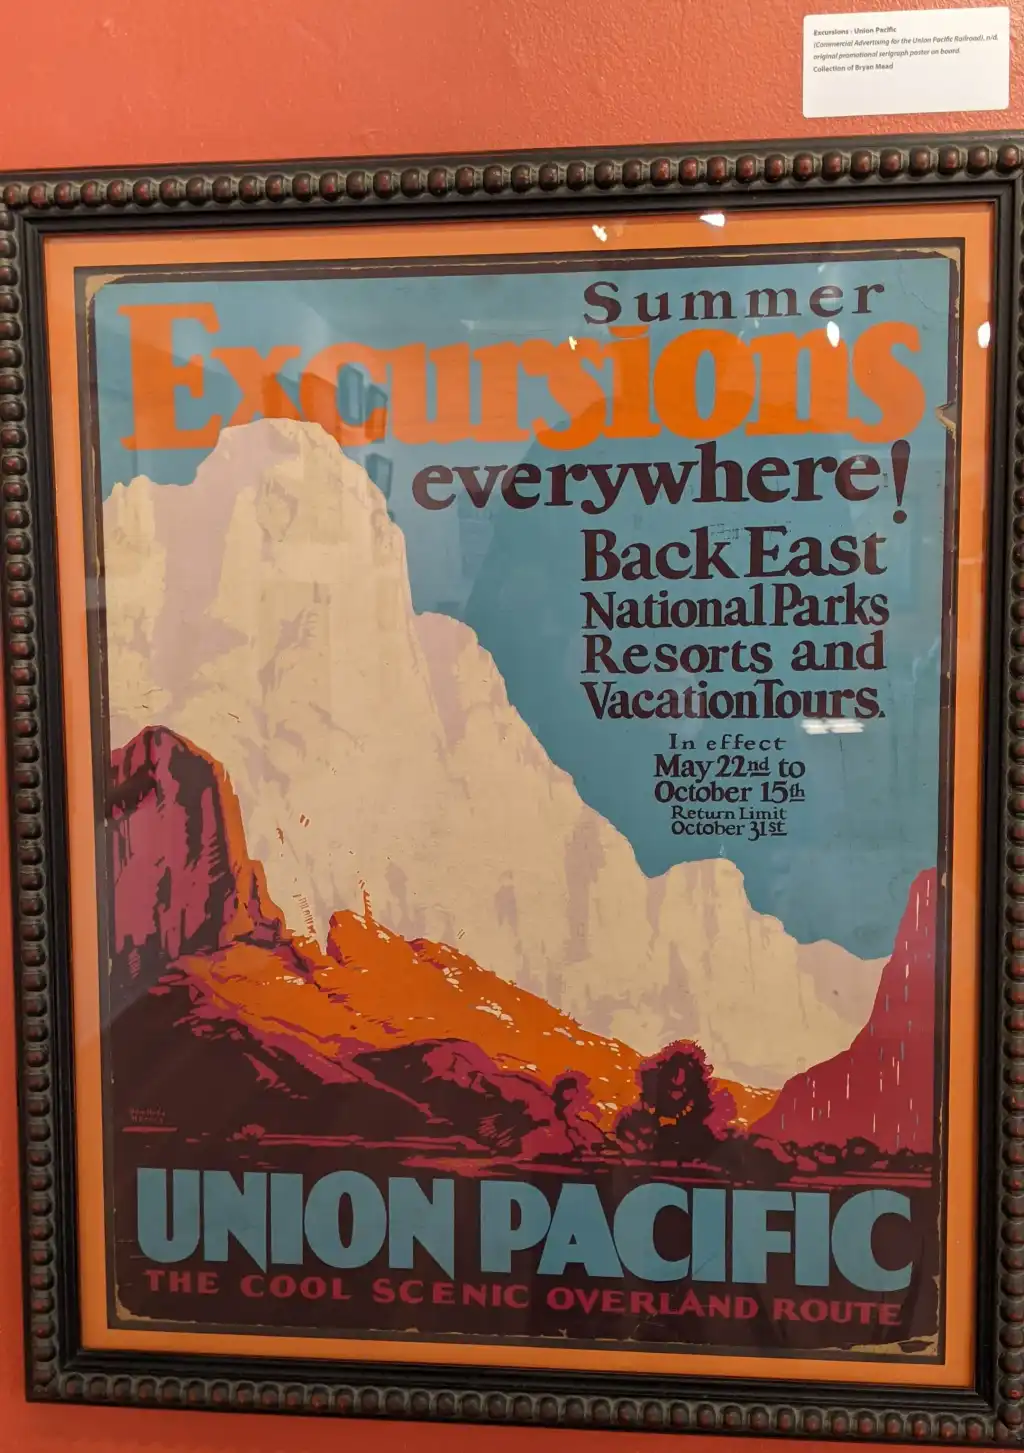 Union Pacific poster by Sam Hyde Harris